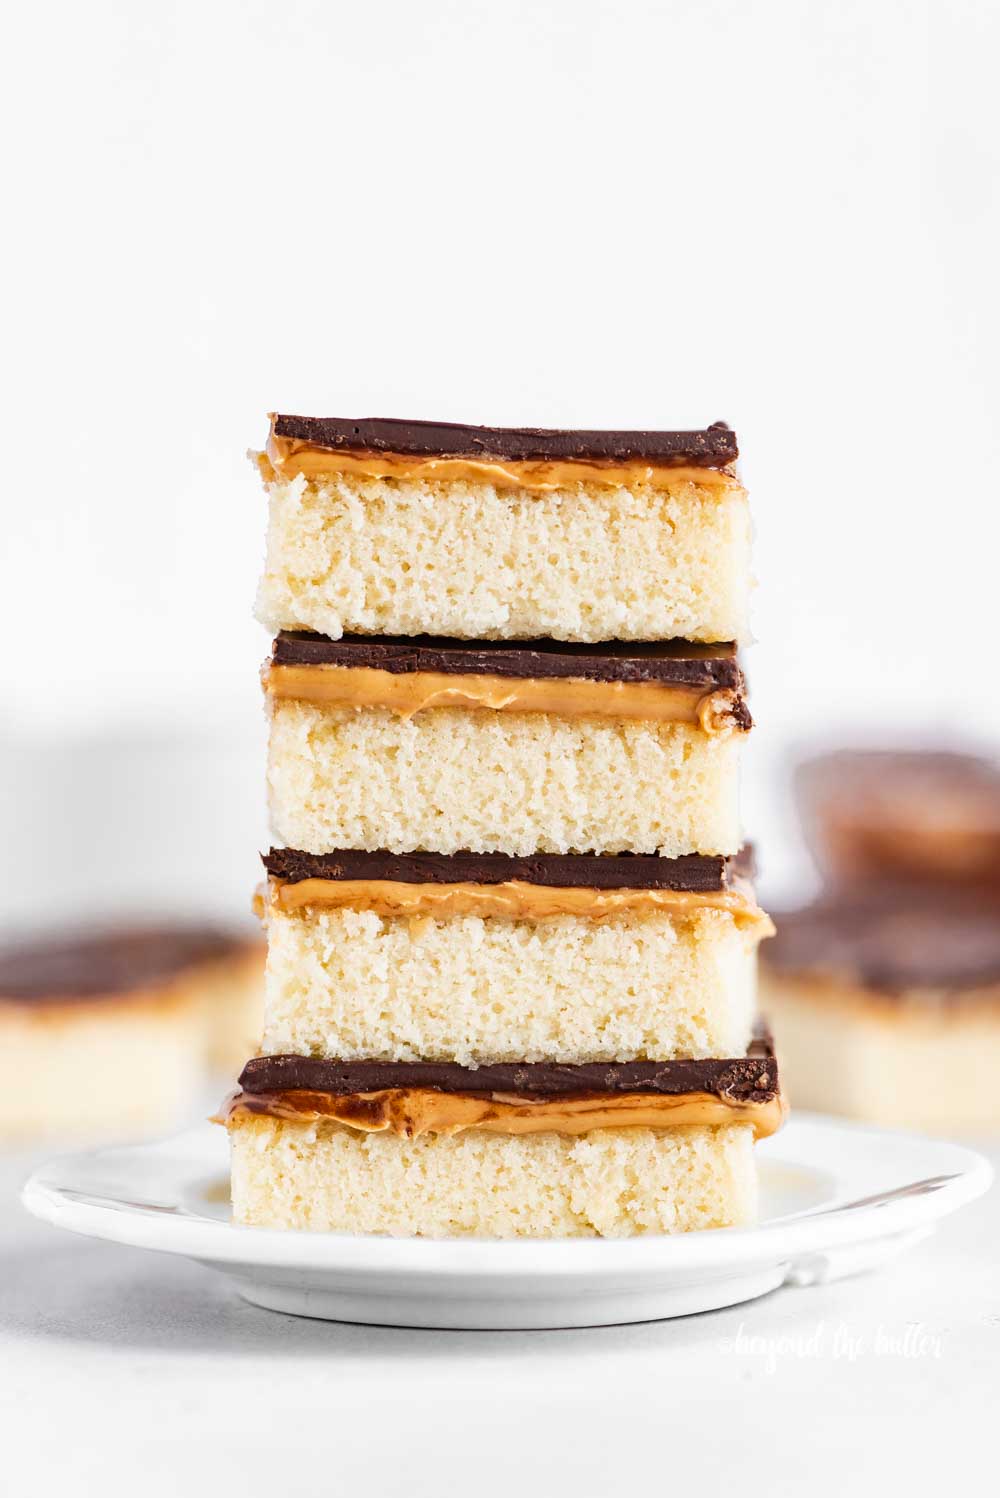 Image of stacked homemade peanut butter kandy kakes on a white dessert plate | All Images © Beyond the Butter™